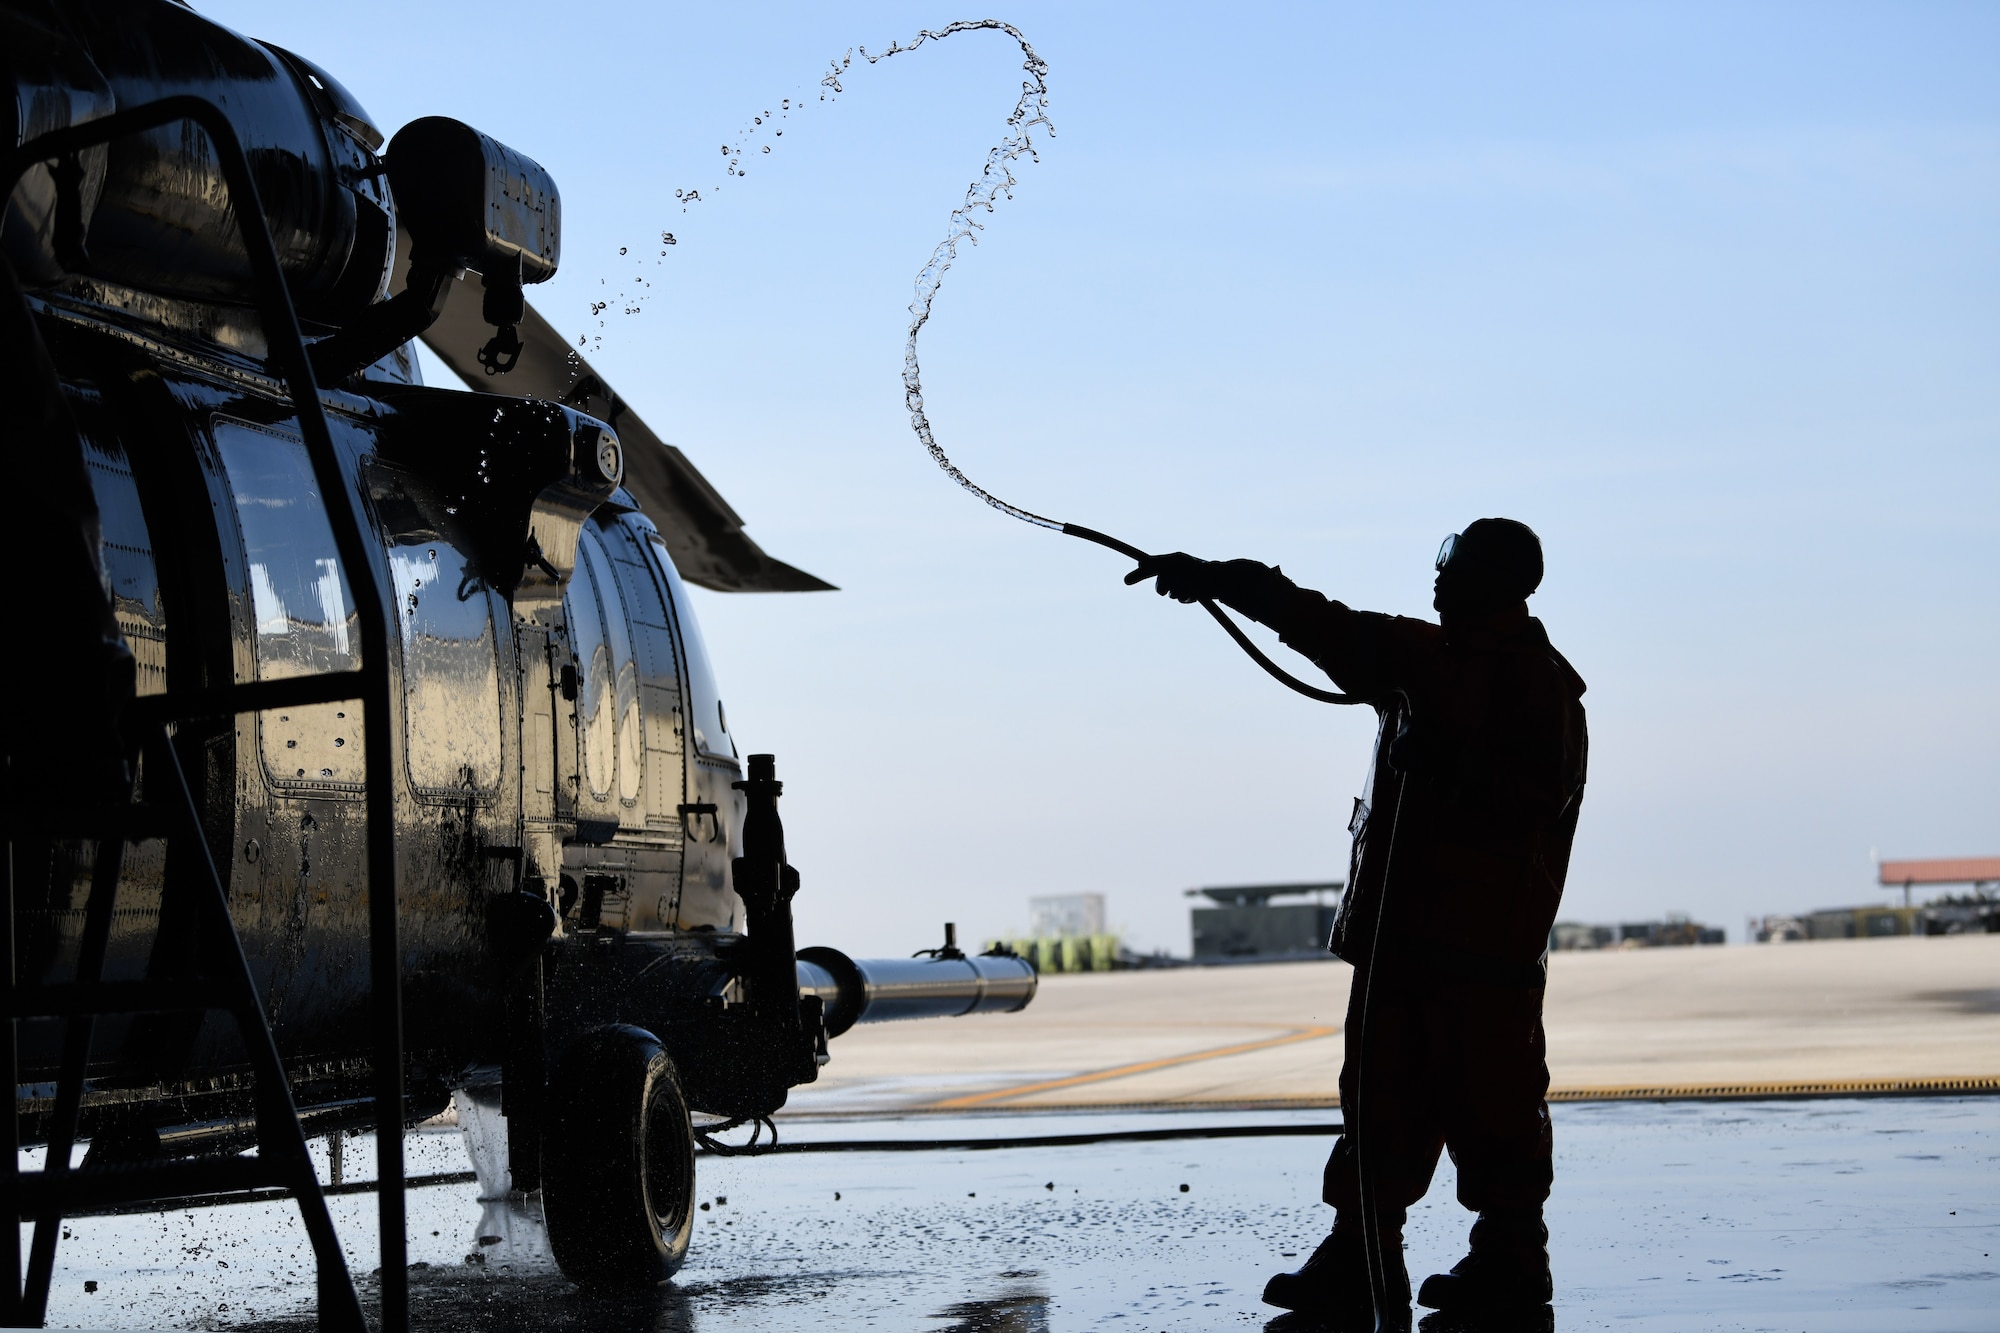 U.S Air Force Airman 1st Class Michael Becerra, an instrument flight control systems specialist from the 31st Aircraft Maintenance Squadron, uses a hose to wash an HH-60G Pave Hawk helicopter at Aviano Air Base, Italy, Oct. 22, 2019. The wash was a part of an aircraft reconstitution checklist, to remove any debris from sandy conditions within desert AORs. (U.S. Air Force photo by Airman 1st Class Ericka A. Woolever).